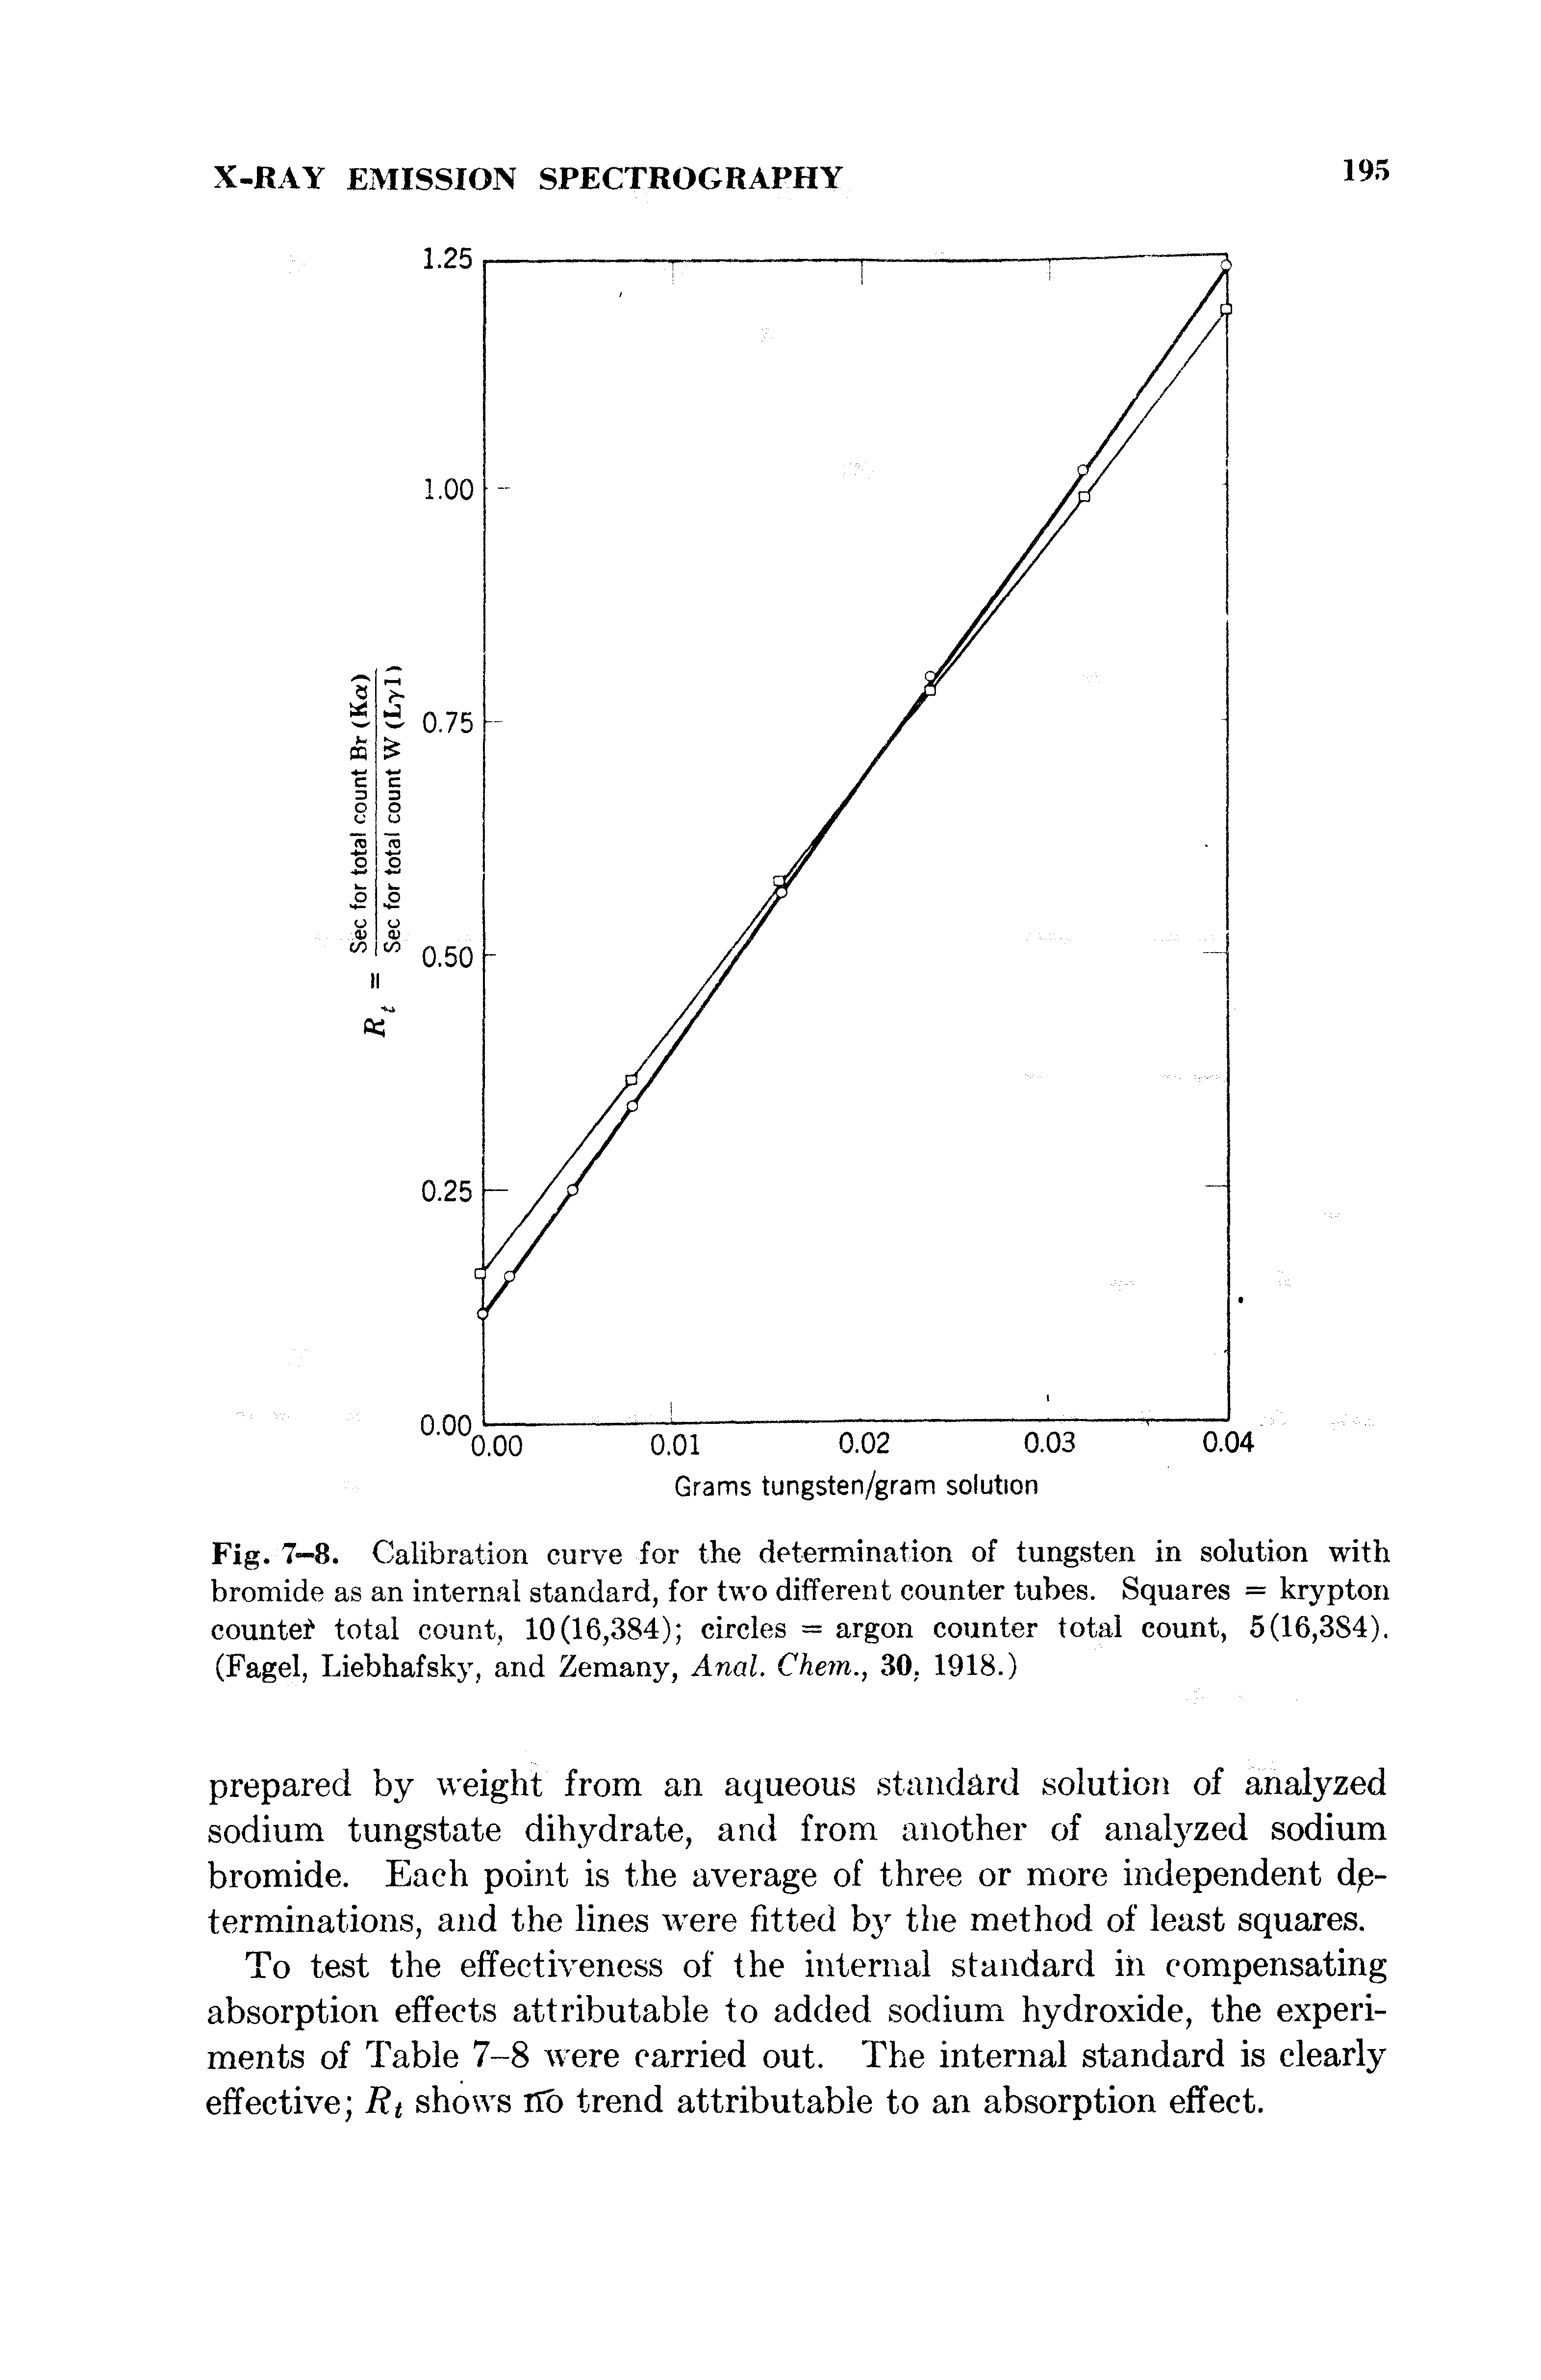 Fig. 7—8. Calibration curve for the determination of tungsten in solution with bromide as an internal standard, for two different counter tubes. Squares = krypton counted total count, 10(16,384) circles = argon counter total count, 5(16,384). (Fagel, Liebhafsky, and Zemany, Anal. Chem., 30, 1918.)...